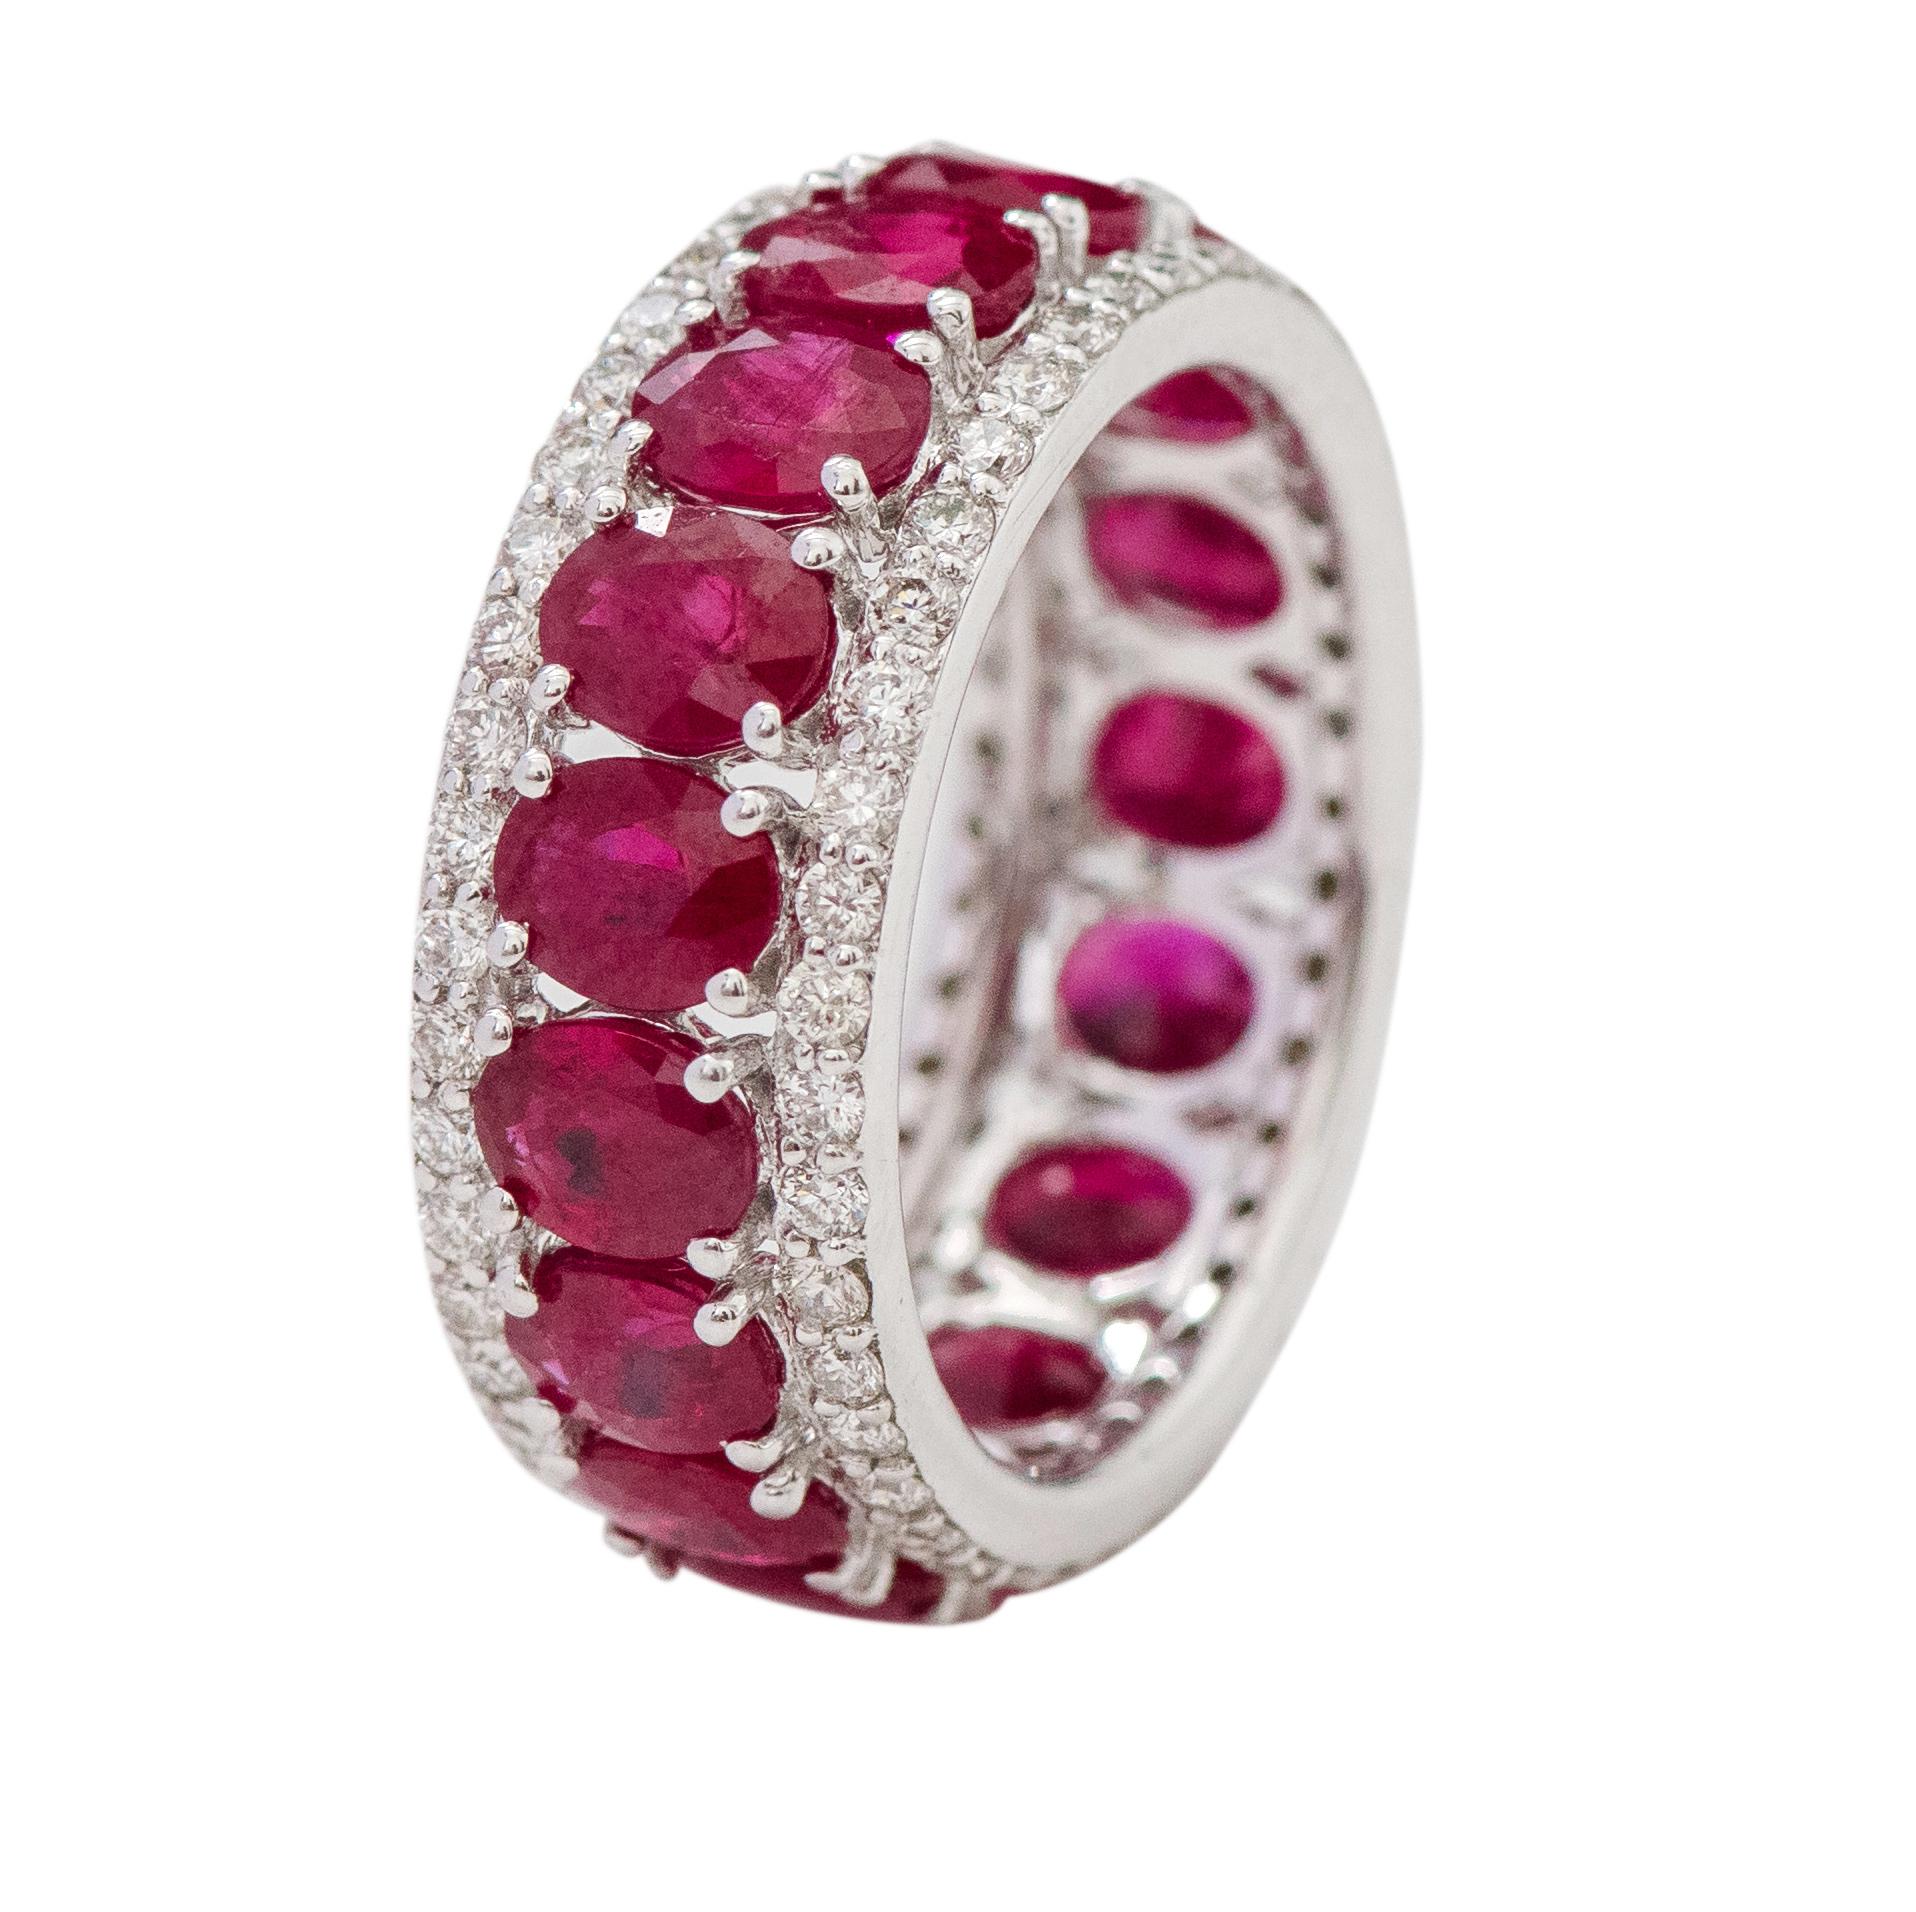 18 Karat White Gold 7.02 Carat Oval-Cut Ruby and Diamond Eternity Band Ring For Sale 2